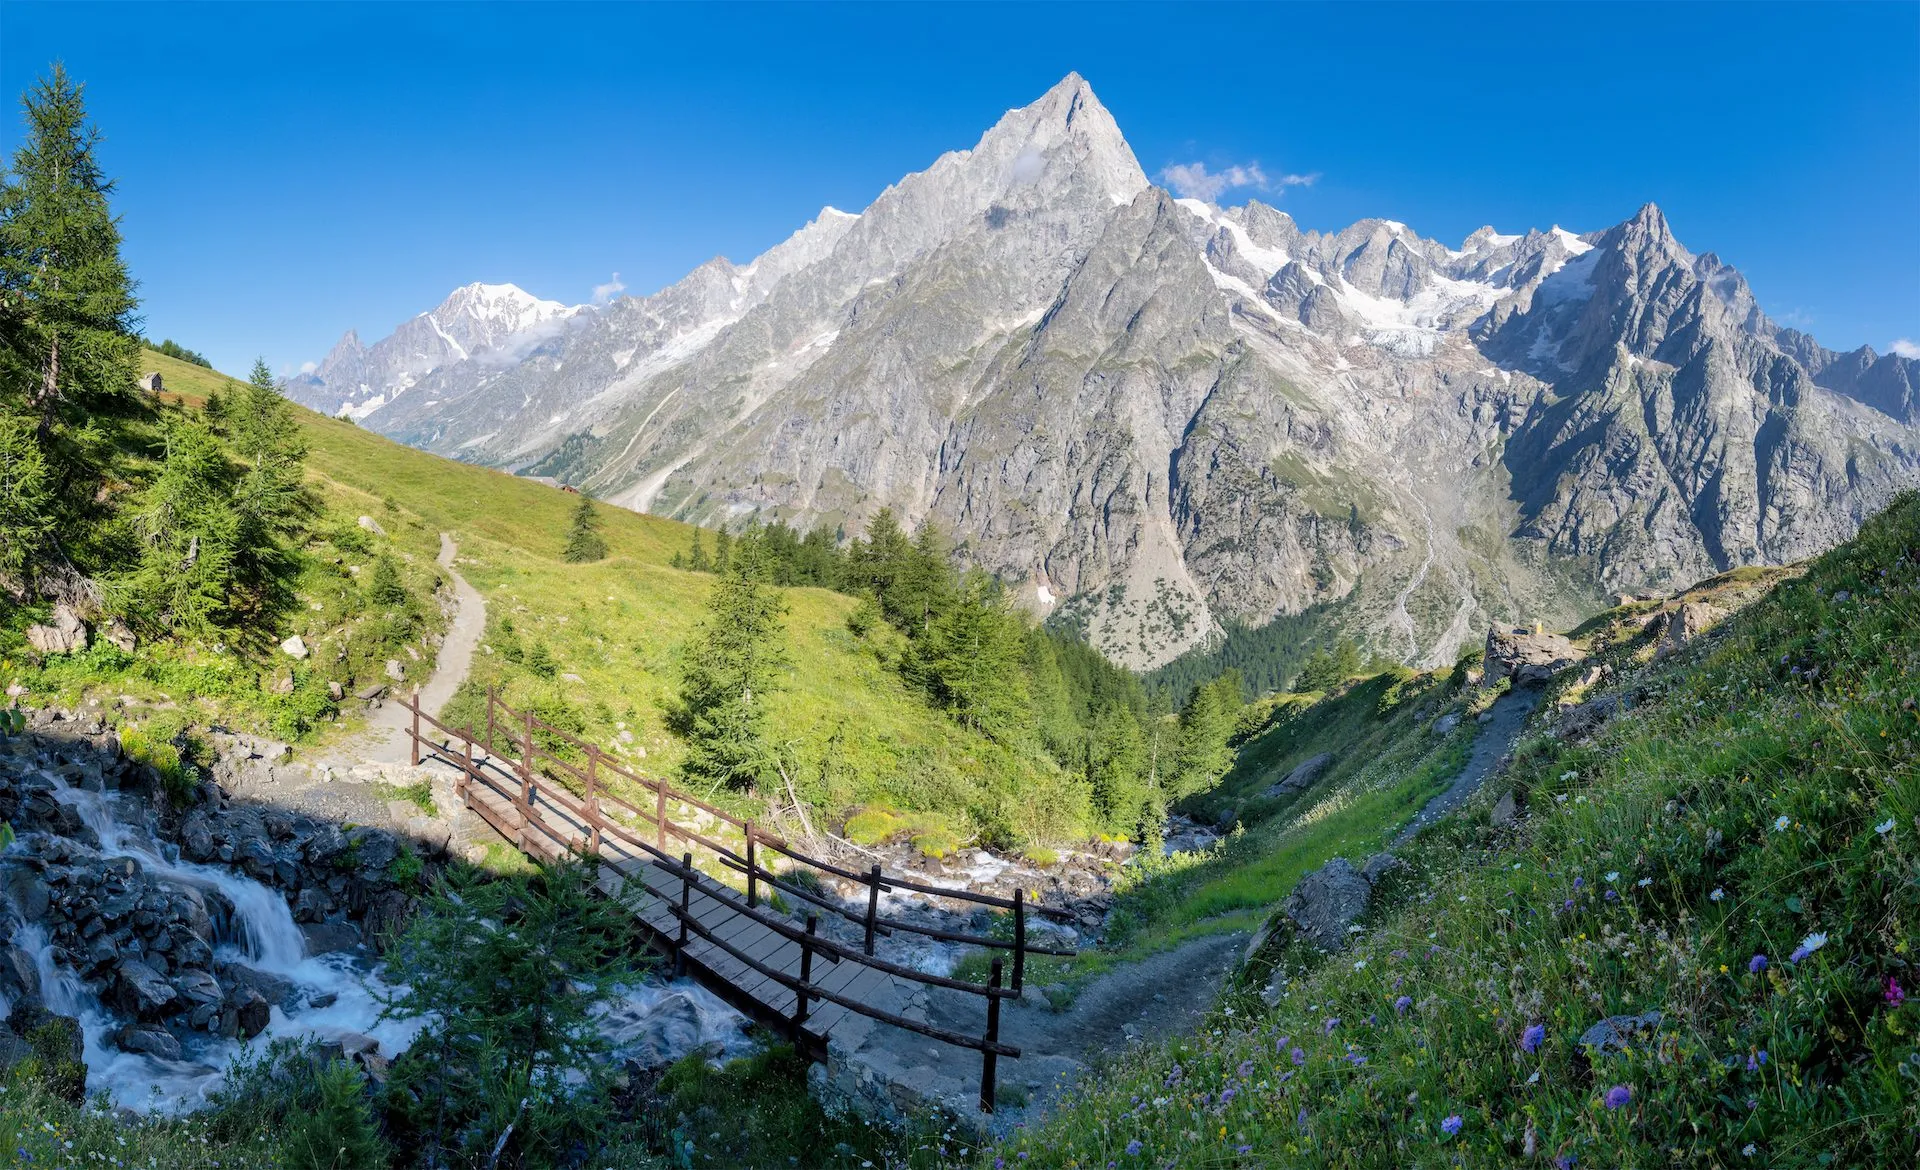 The Grand Jorasses massif from Val Ferret valley